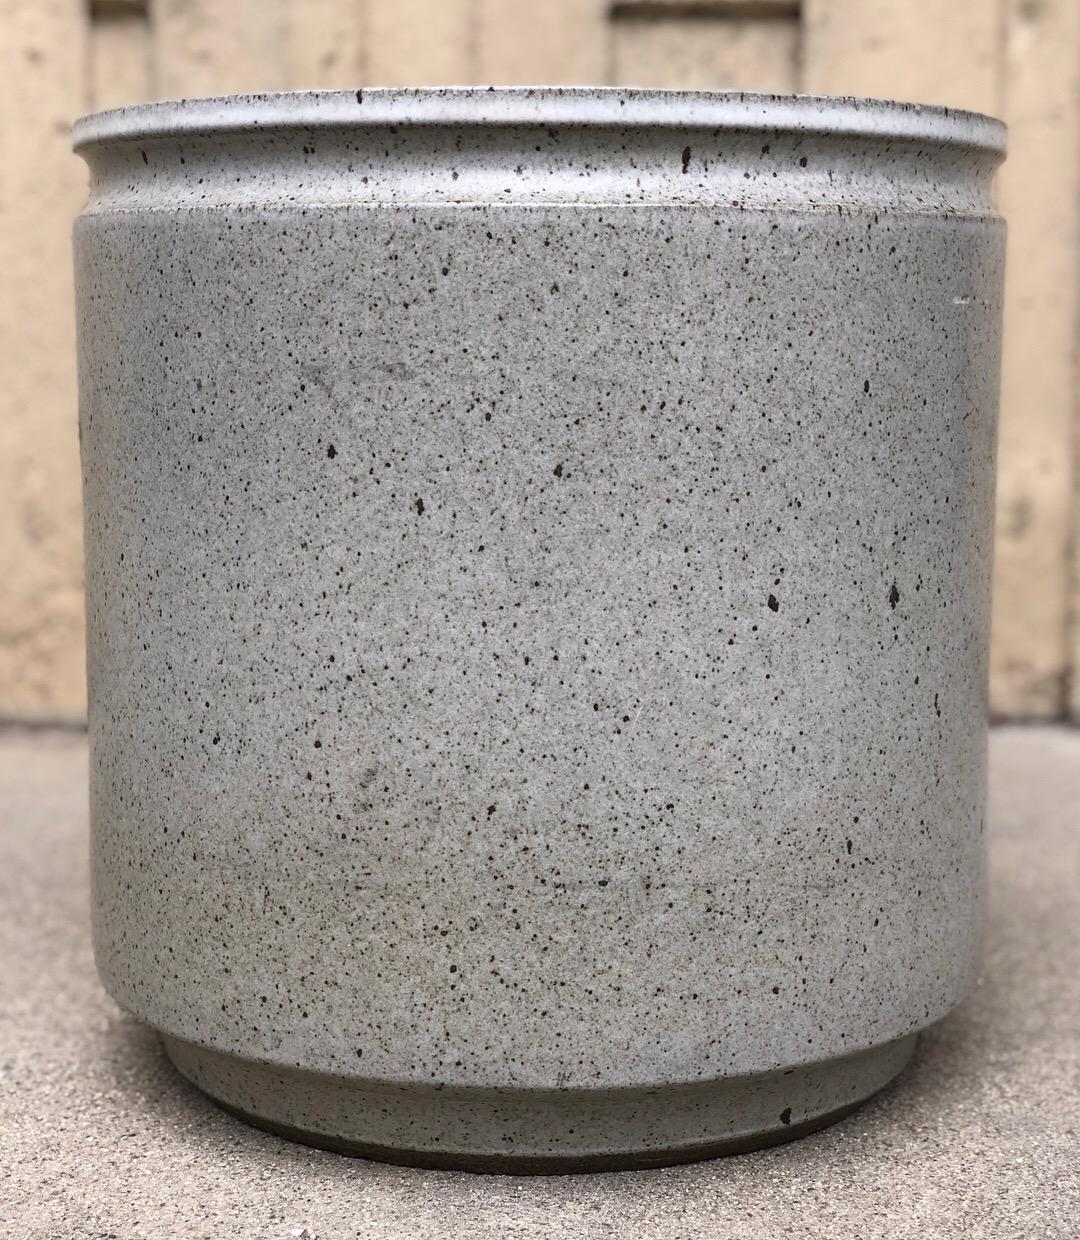 Speckled grey planter by David Cressey for Architectural Pottery. Fantastic example of mid century modern design. No drainage hole present. 